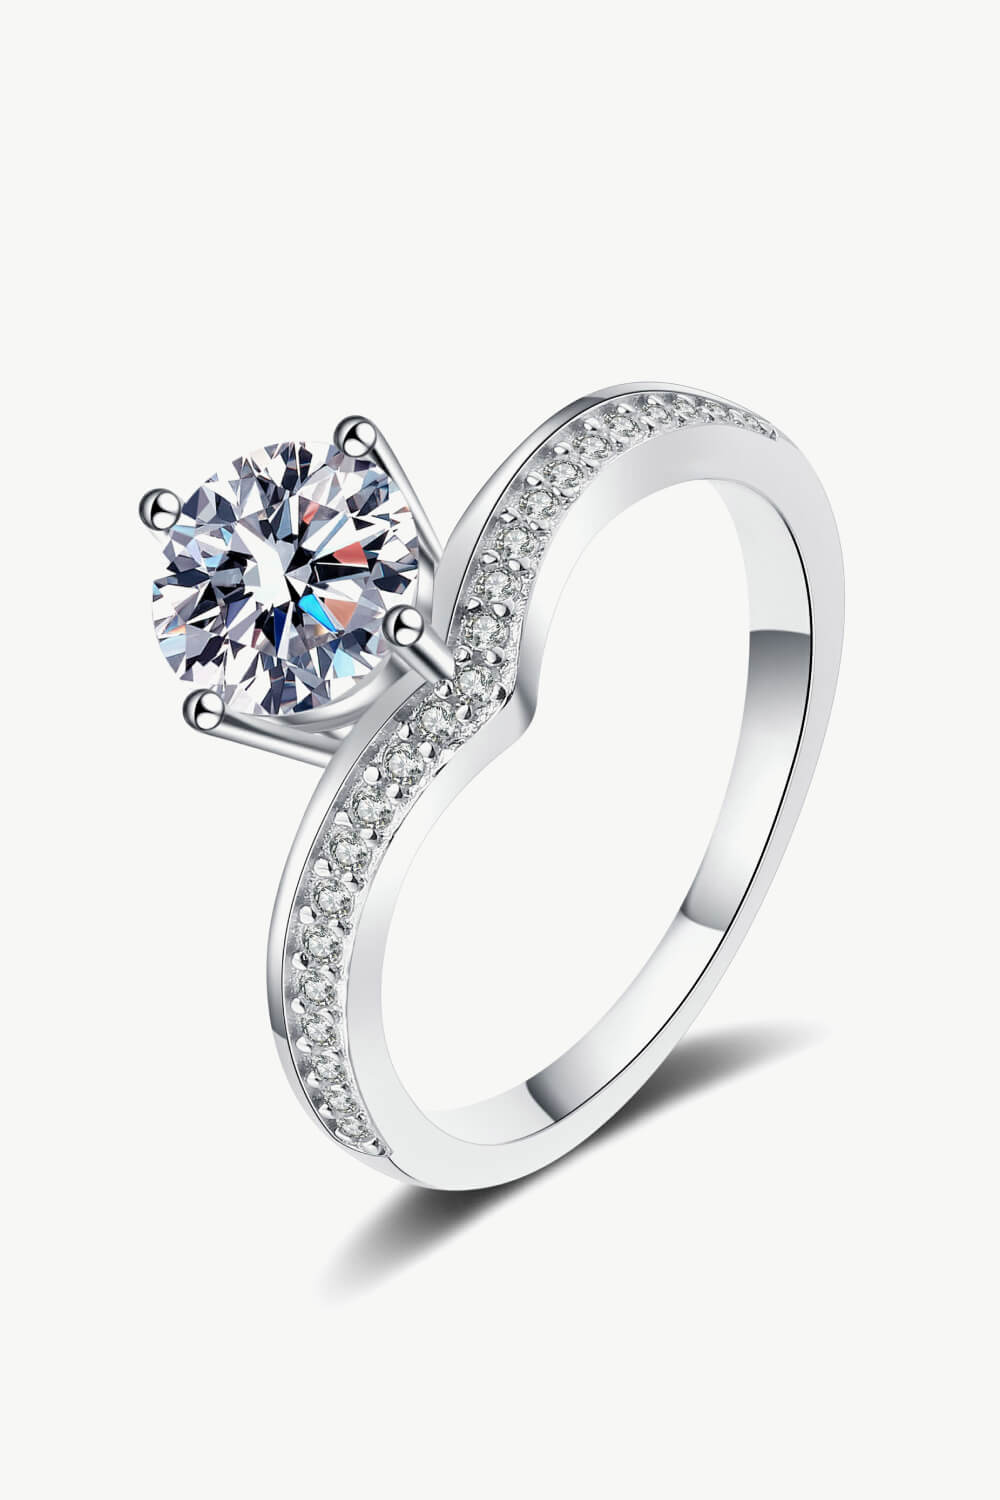 925 Sterling Silver Ring with 1 Carat Moissanite - Sharon David's